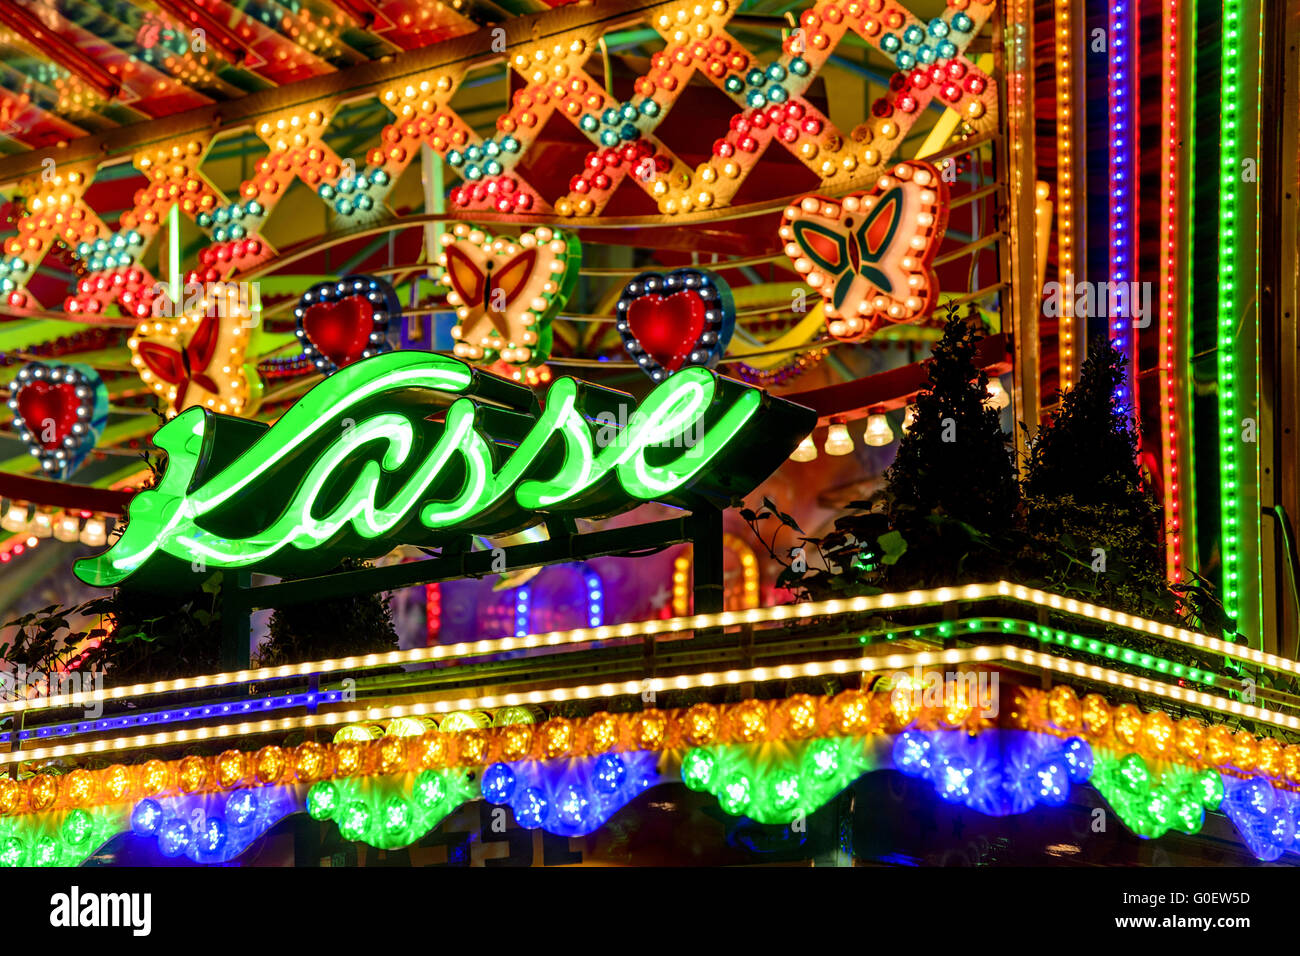 at the wiesn, lettering, Kasse, at night Stock Photo